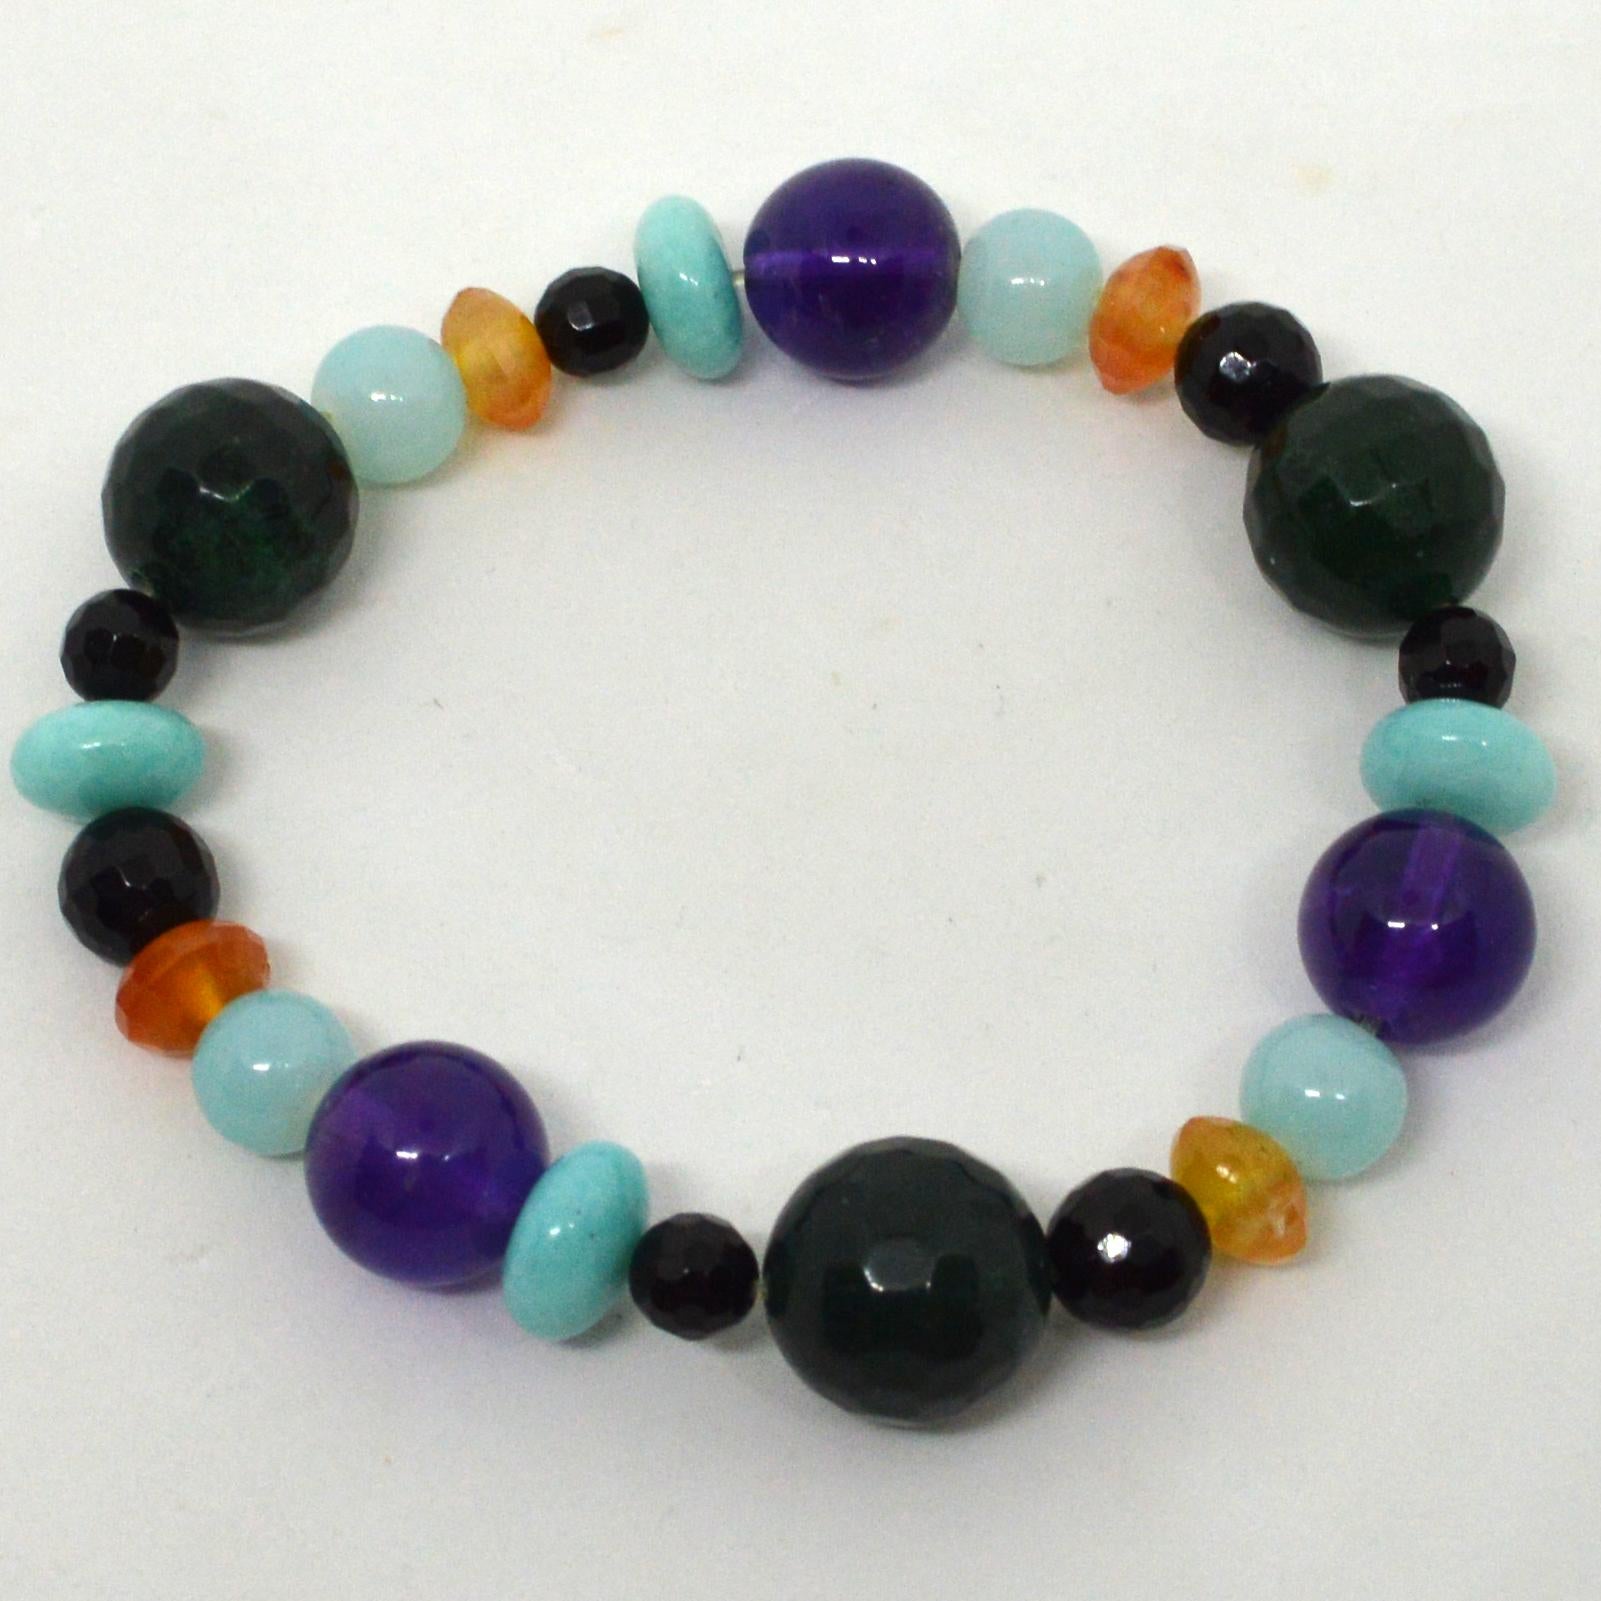 Barcelona elastic bracelet made from 6mm, 8mm, 14mm faceted Onyx, 12mm polished Amethyst, 8x5mm Faceted Carnelian, 10x5mm polished Amazonite and 8mm aqua glass beads.
Fits  up to 18cm wrist.
Custom alterations available